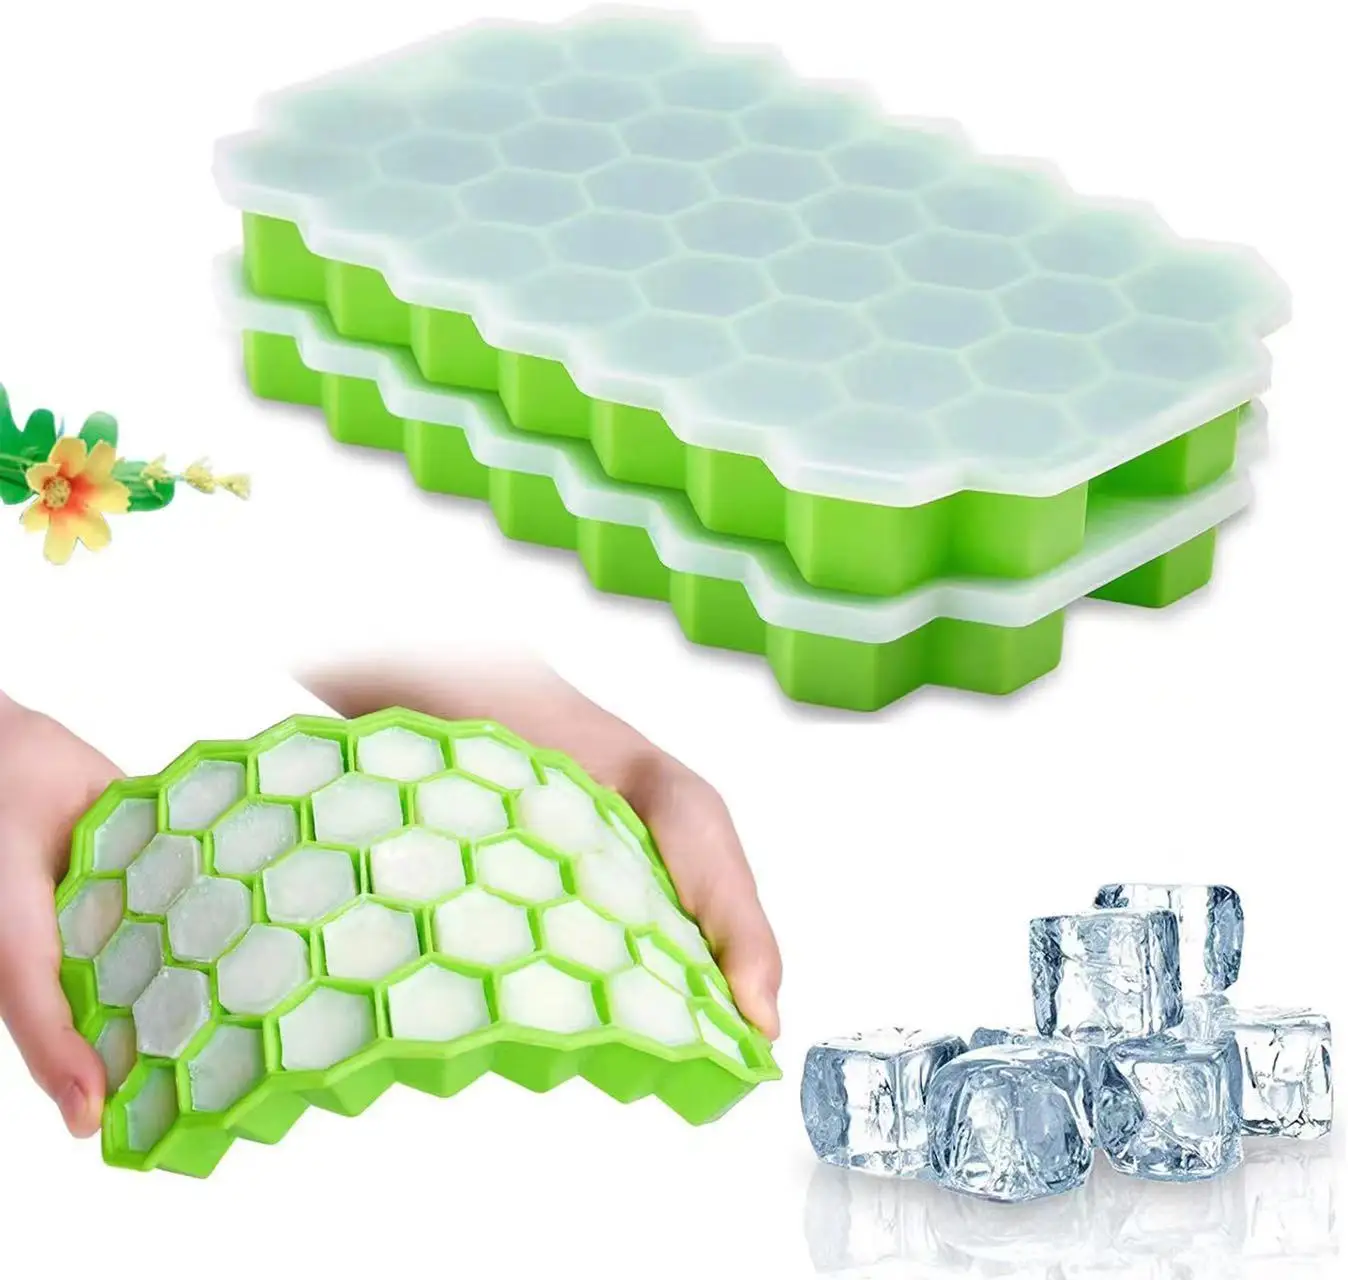 

Creative 37 Cavity Honeycomb Ice Cube Maker Reusable Trays Silicone Ice Cube Mold BPA Free Ice Mould with Removable Lids